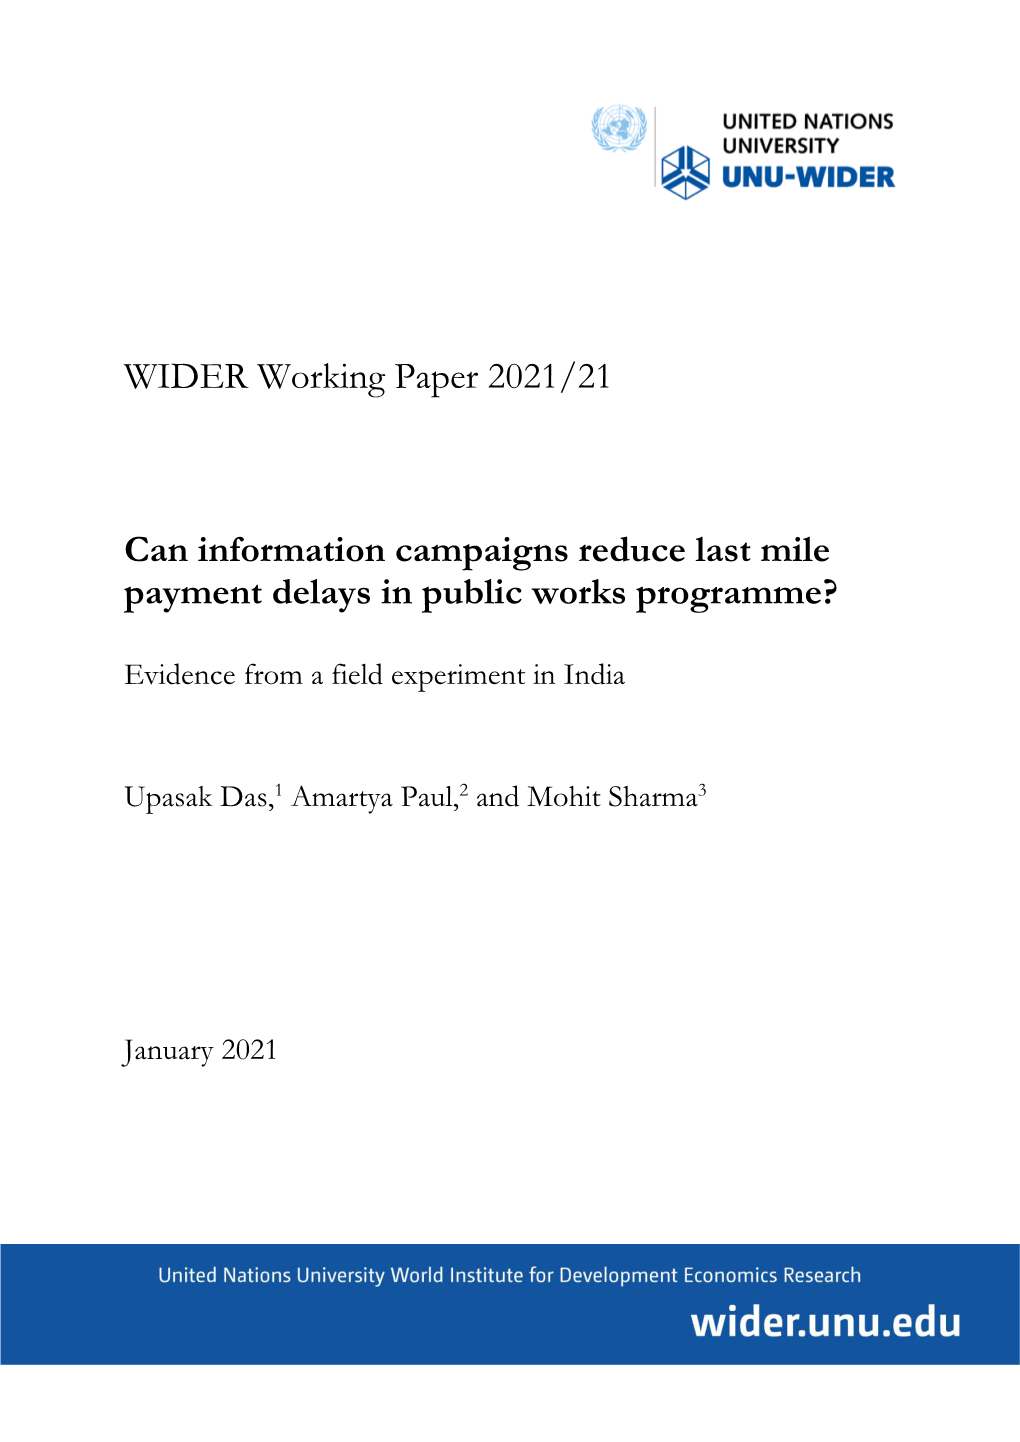 WIDER Working Paper 2021/21-Can Information Dissemination Reduce